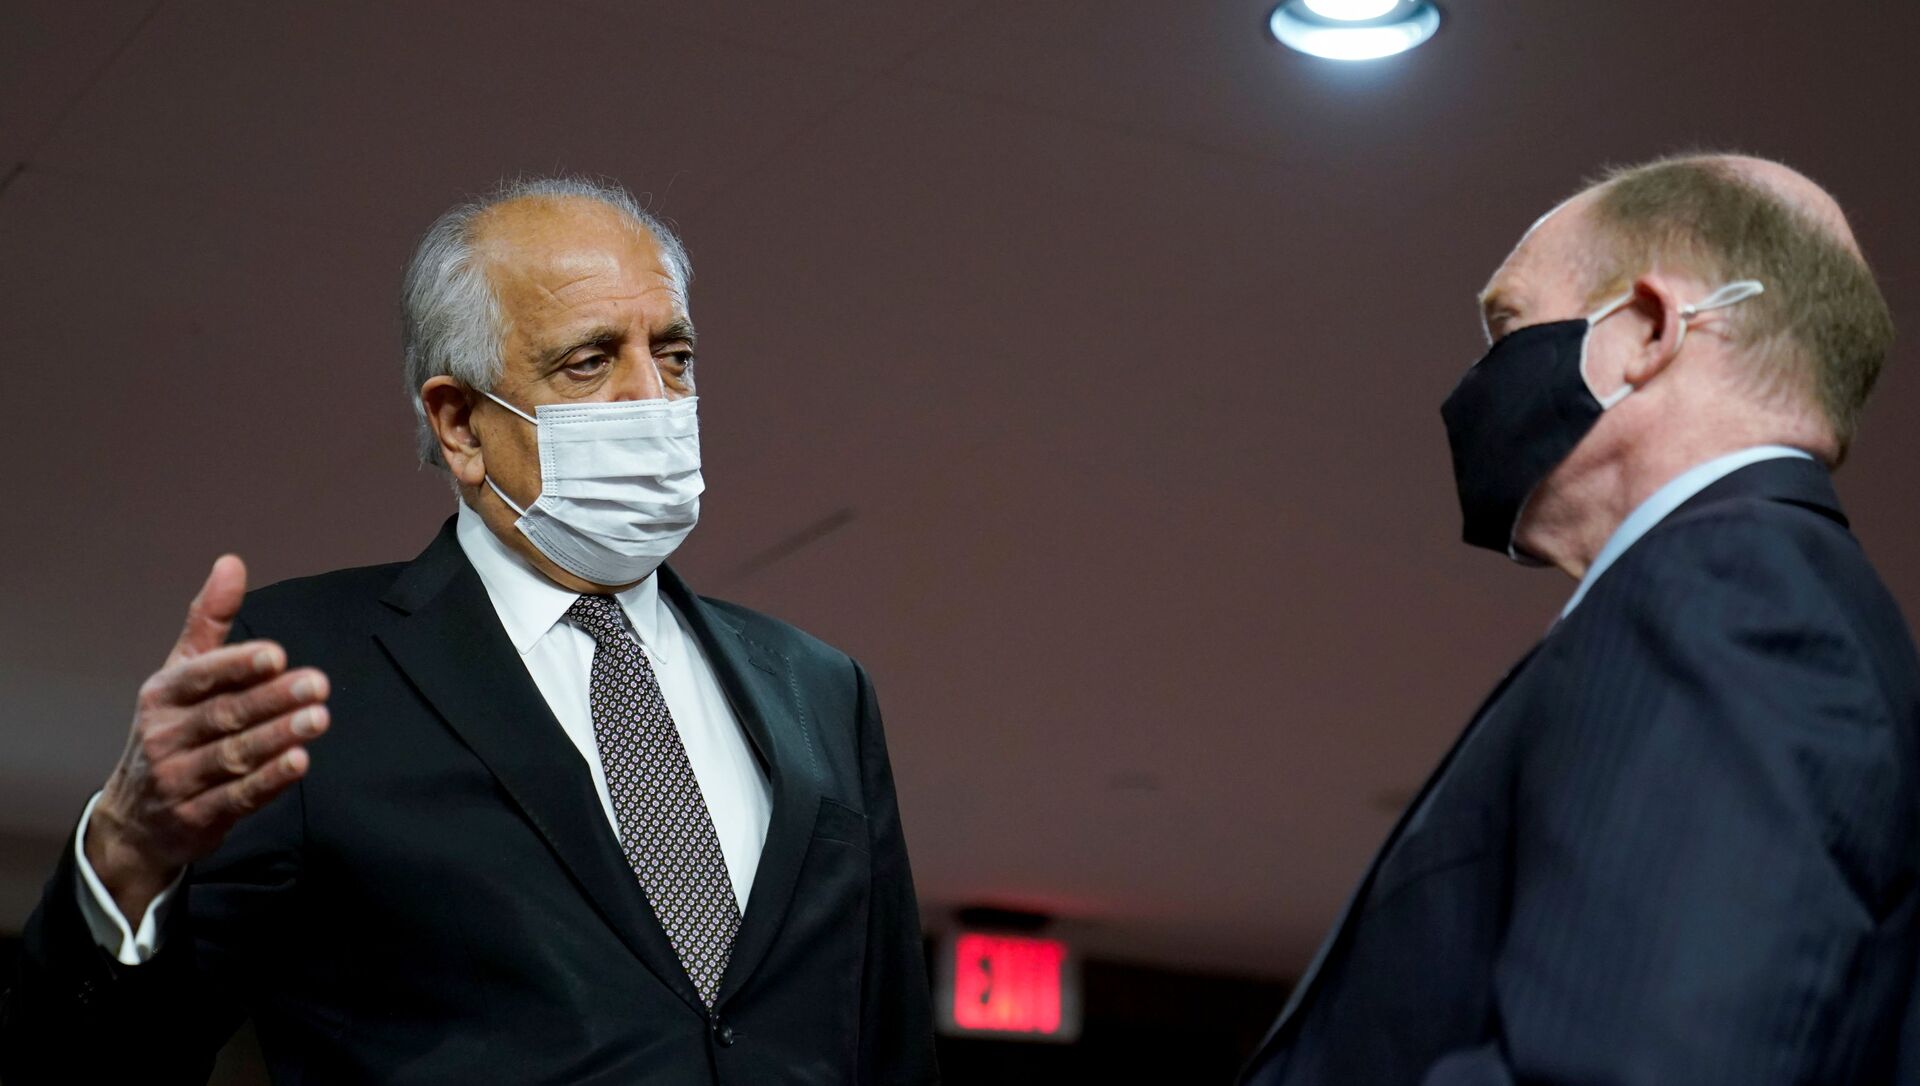 Zalmay Khalilzad, special envoy for Afghanistan Reconciliation, talks with U.S. Senator Chris Coons (D-DE), before the start of a Senate Foreign Relations Committee hearing on Capitol Hill in Washington, U.S., April 27, 2021. - Sputnik International, 1920, 27.04.2021